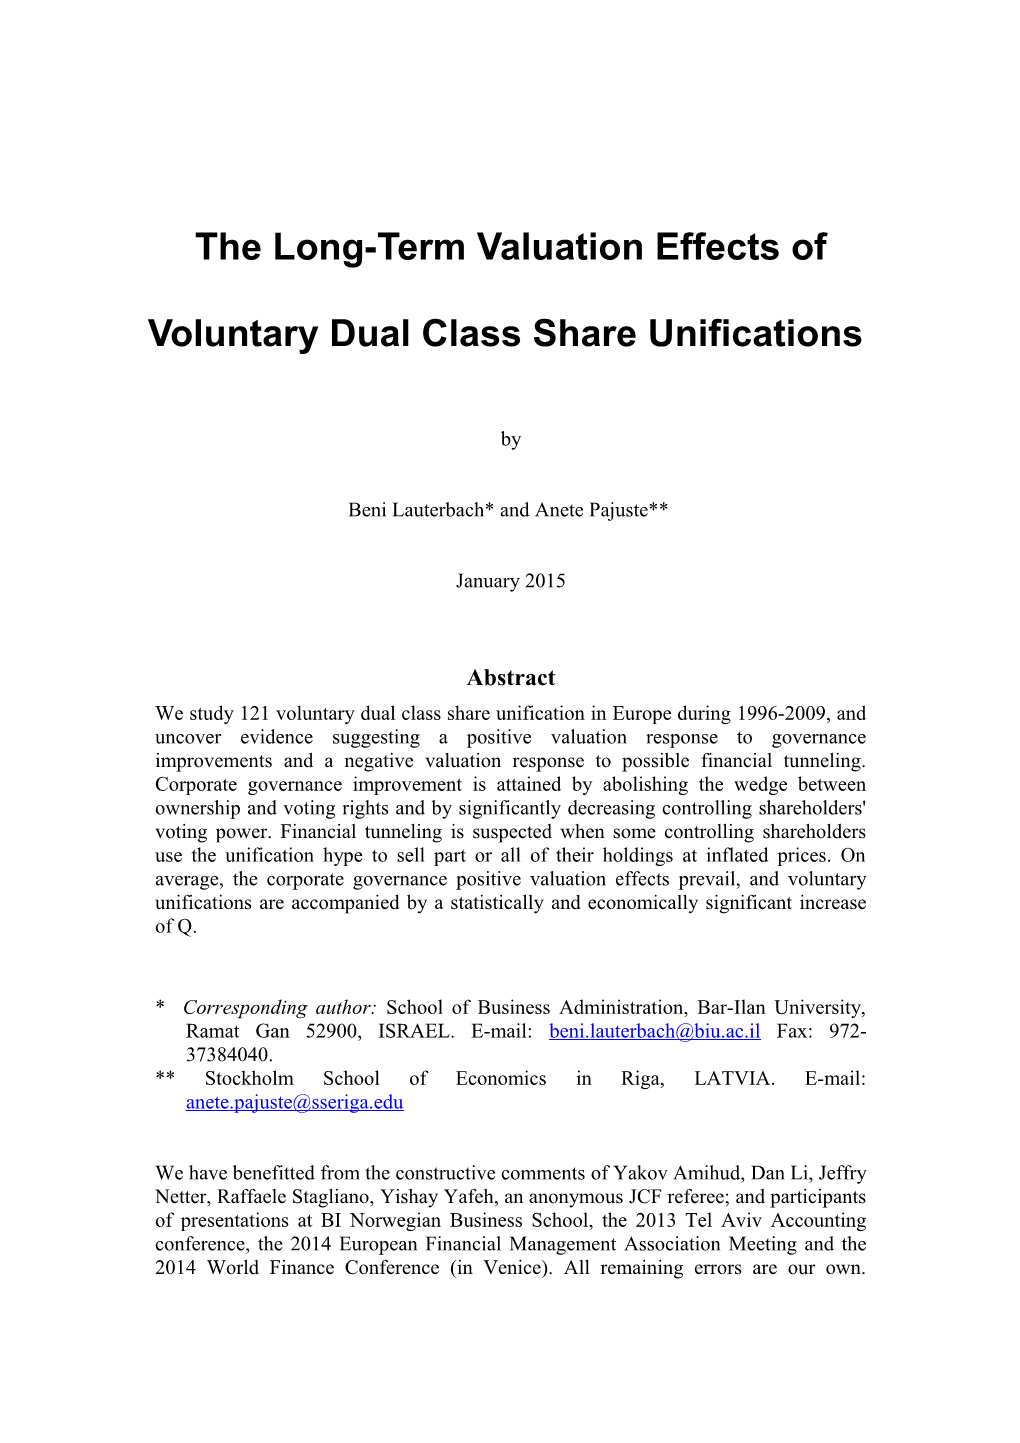 The Long-Term Valuation Effects of Voluntary Dual Class Share Unifications